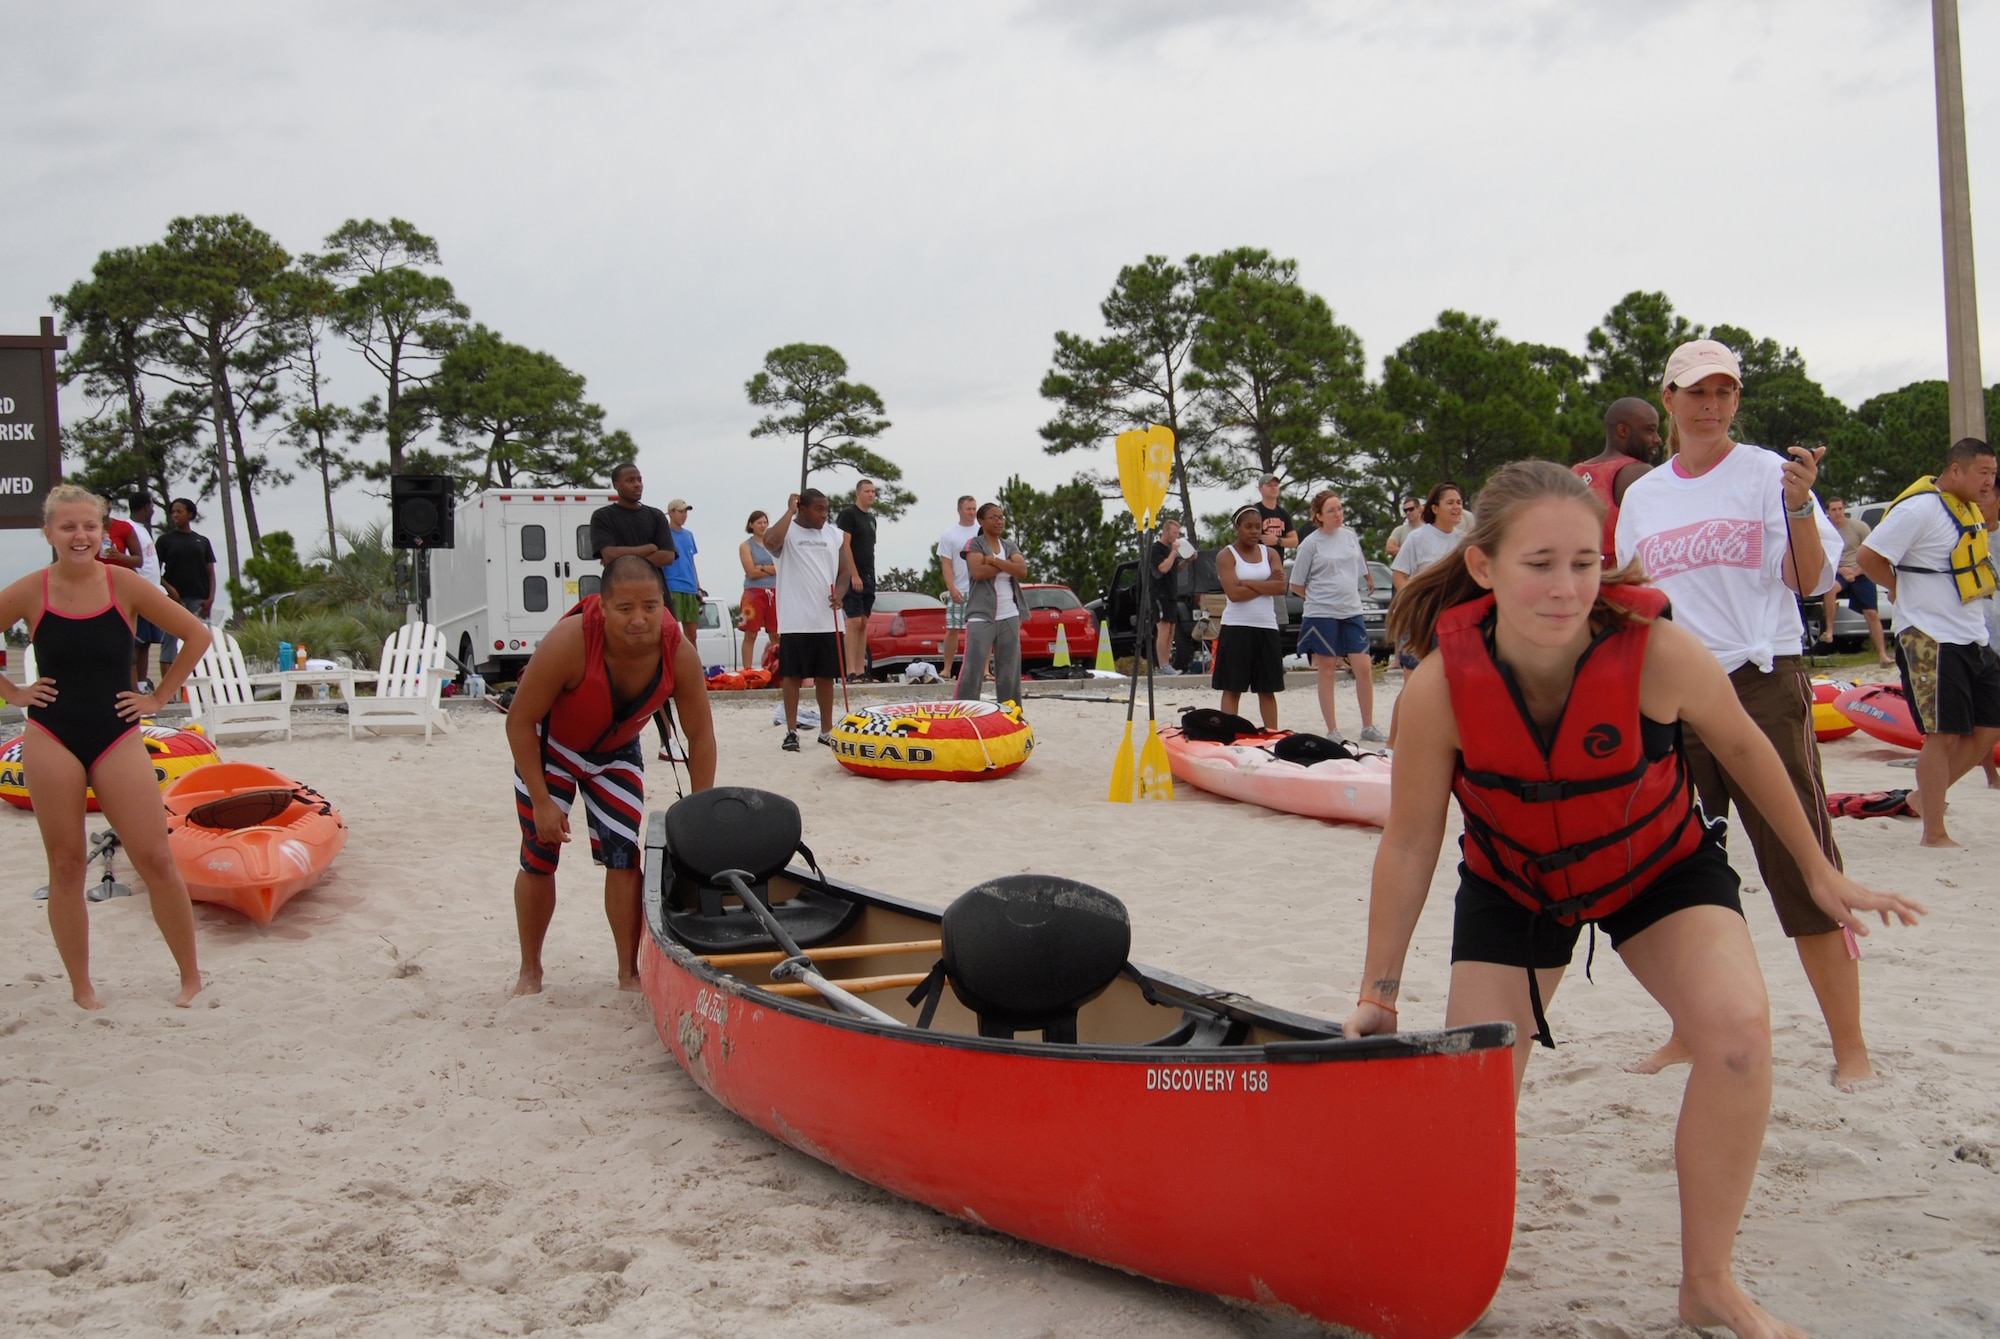 U.S. Air Force Tech. Sgt. Noel Cabell (back) and Senior Airman Danielle Williams (front), 1st Special Operations Component Maintenance Squadron waits for the sound of the horn starting the second leg of the canoe relay race during the H2Olympics at Hurlburt Field, Fla., Oct. 2, 2009.(U. S. Air Force photo by Staff Sgt. Orly N. Tyrell)